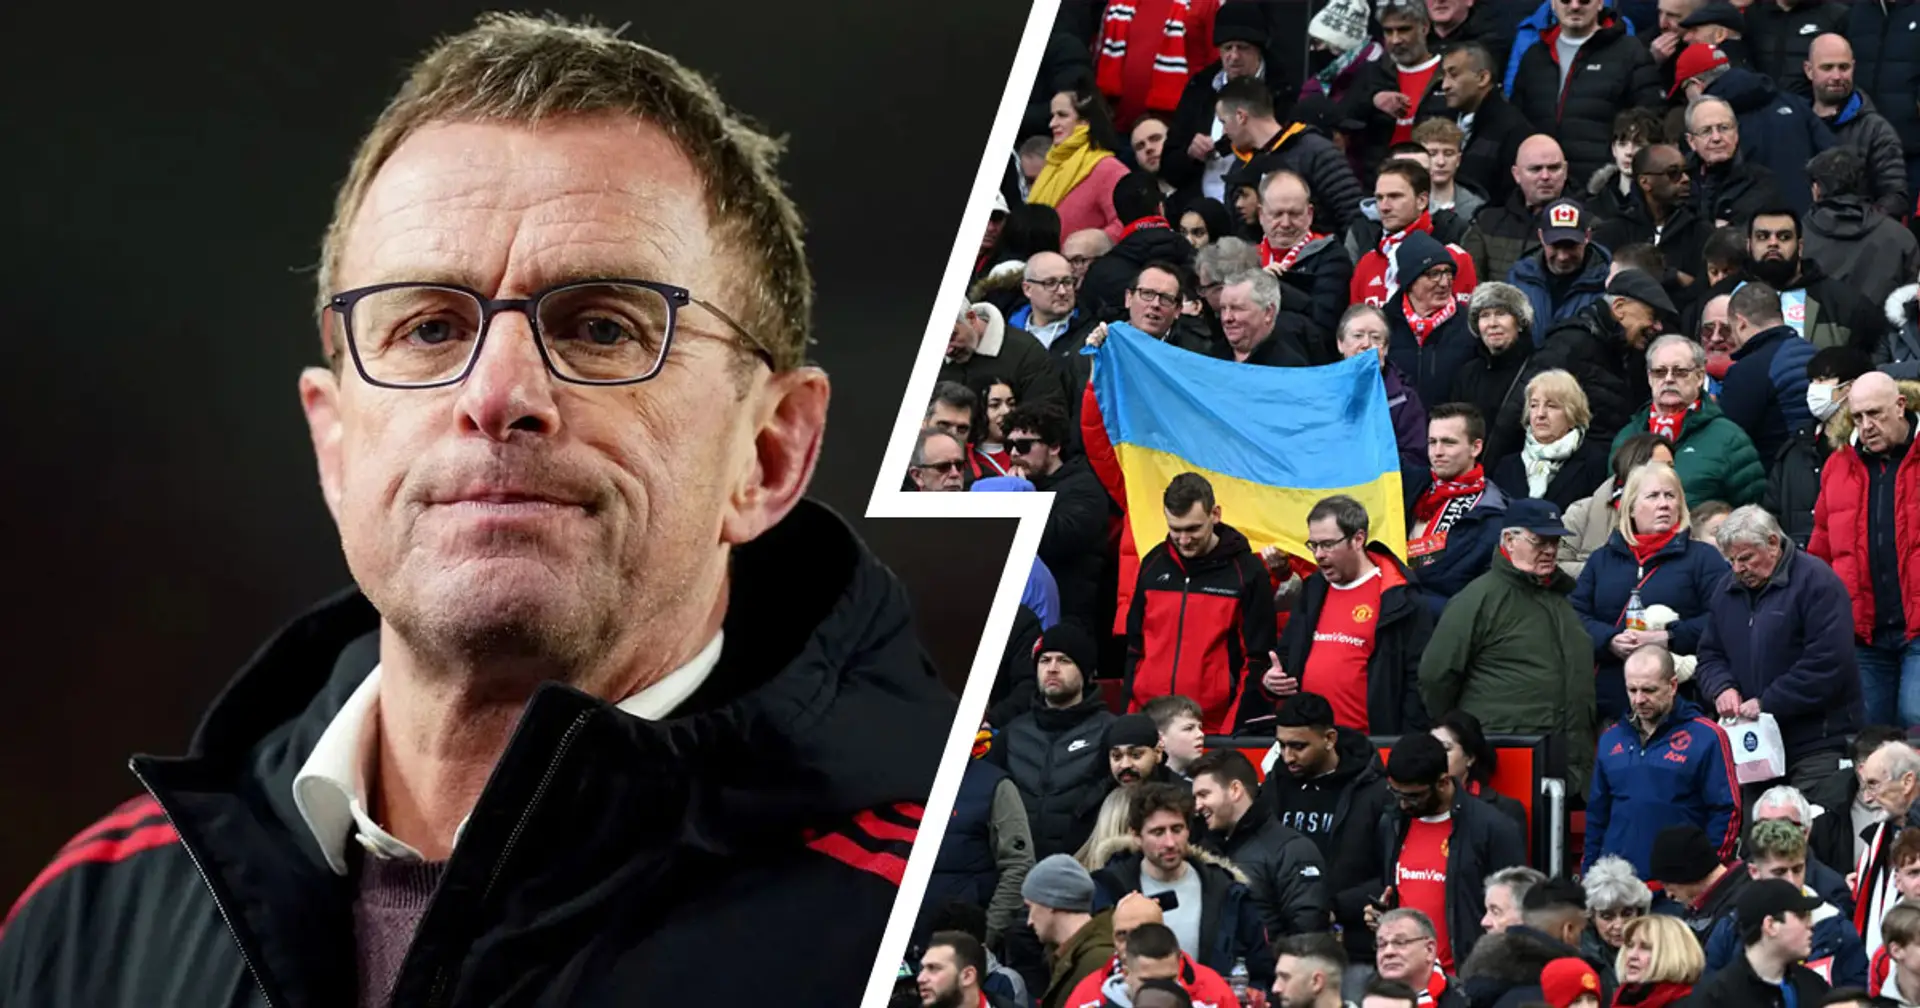 'We have to stand up and show everyone this completely useless war should stop': Rangnick opens up on Ukraine war